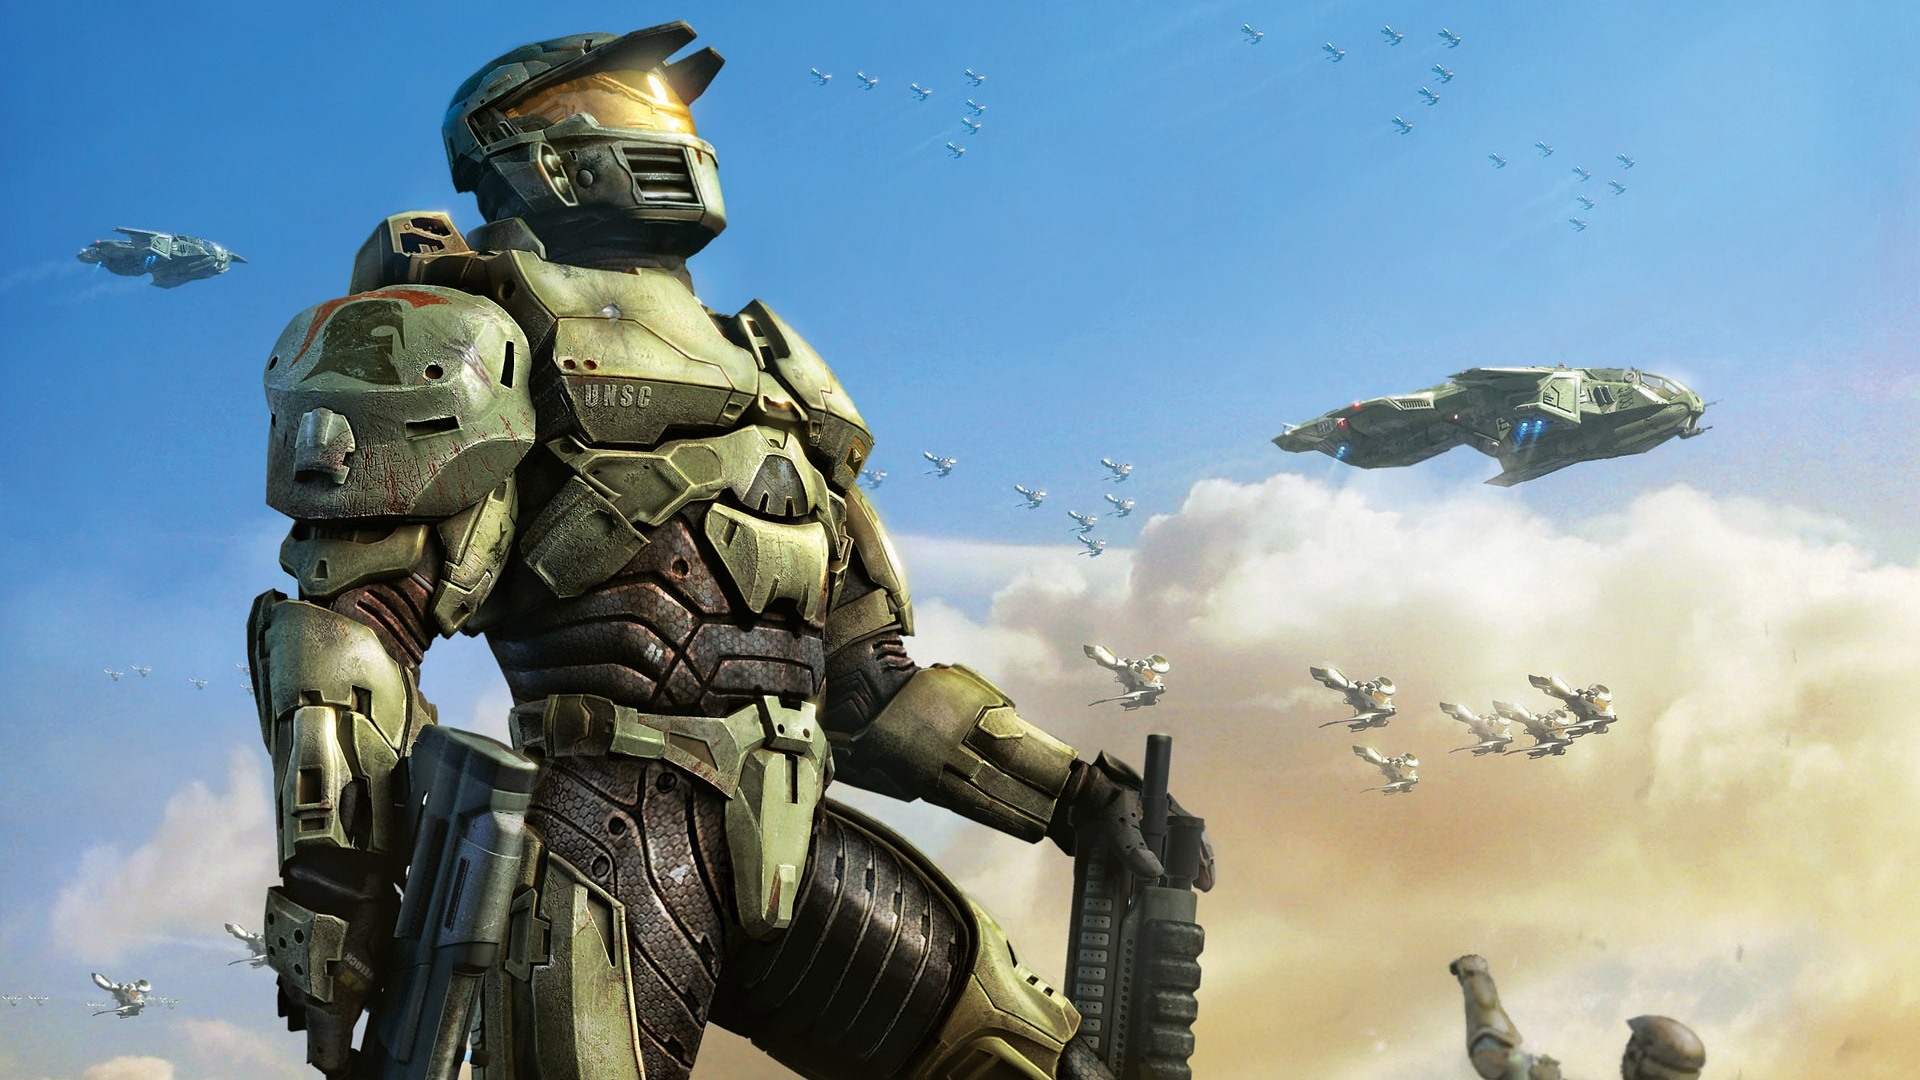 Halo game HD wallpapers #3 - 1920x1080